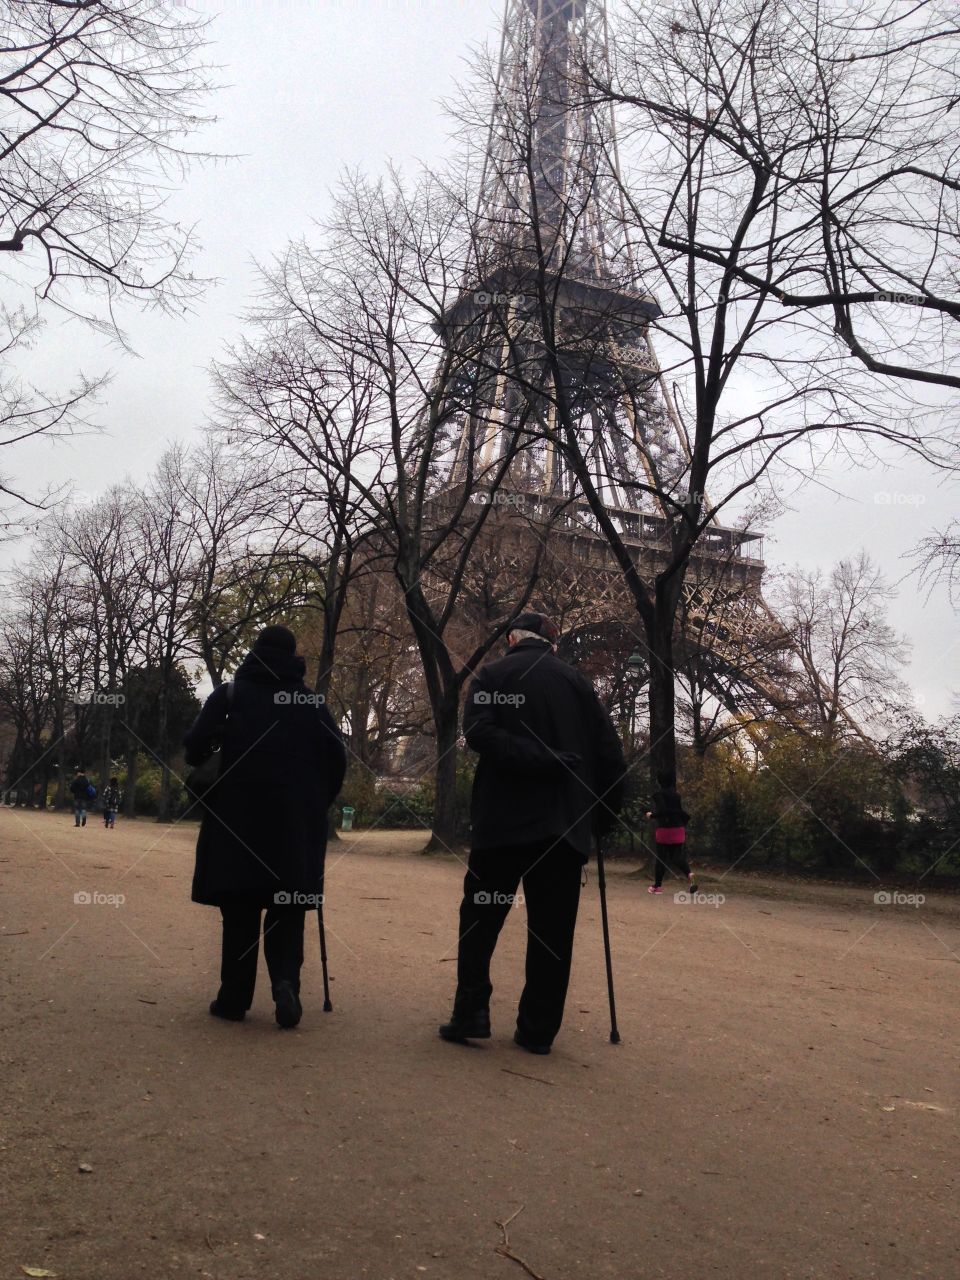 An elderly couple takes a walk together by the Eiffel Tower. Old friends or longtime lovers?